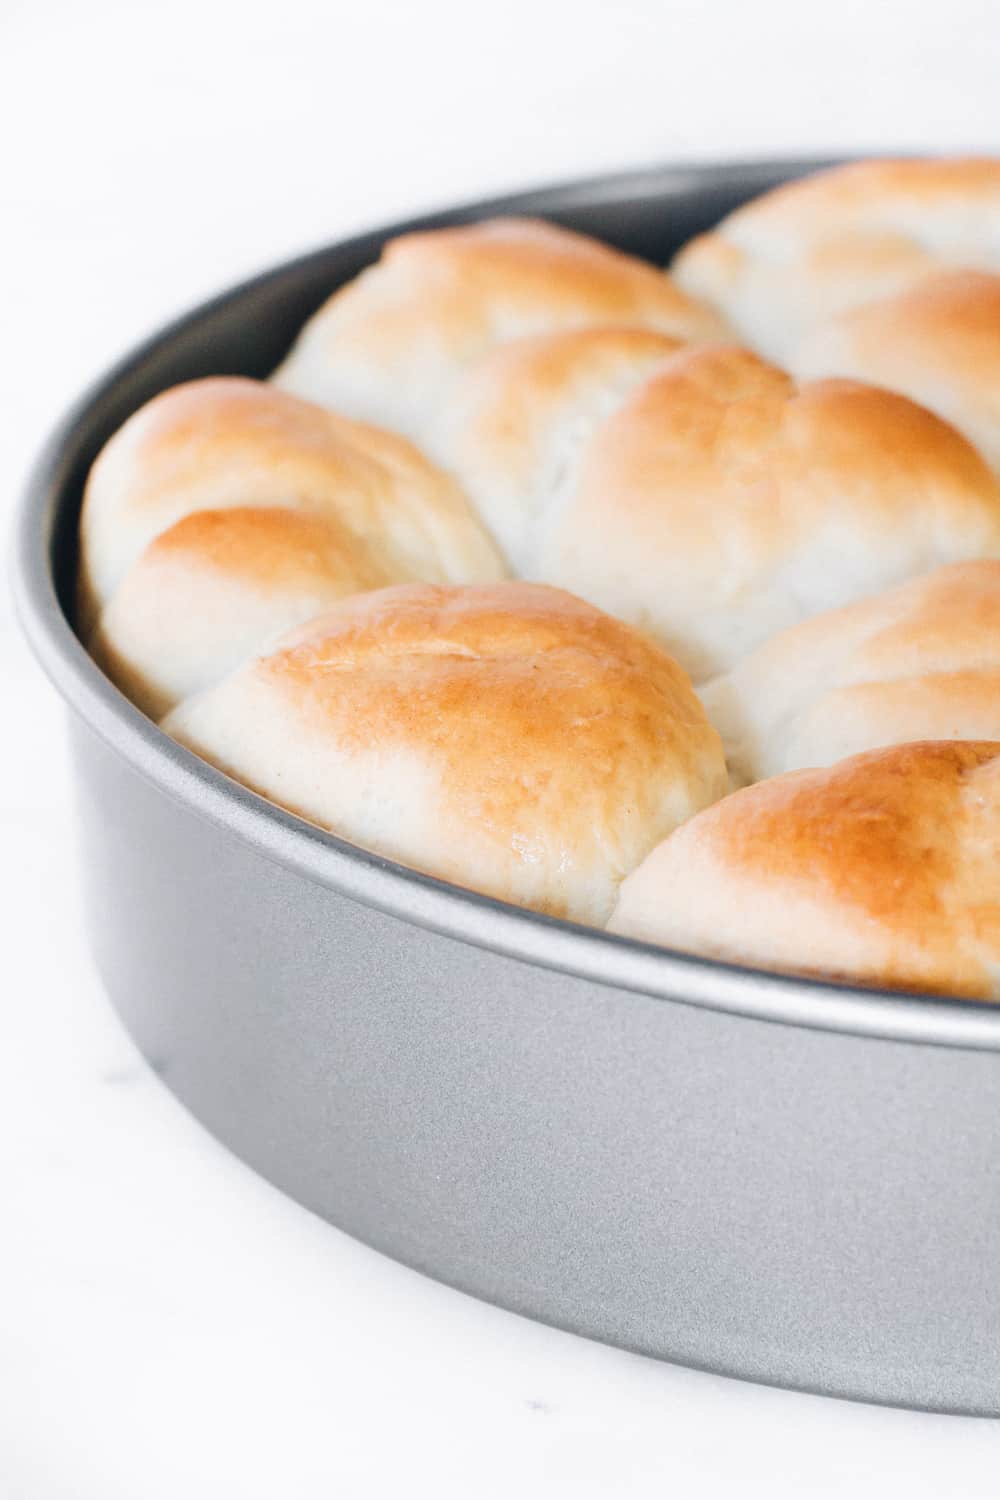 This Go-To Dough is going to become your new favorite recipe for cinnamon rolls and dinner rolls. Simple, tender, and oh so fluffy!